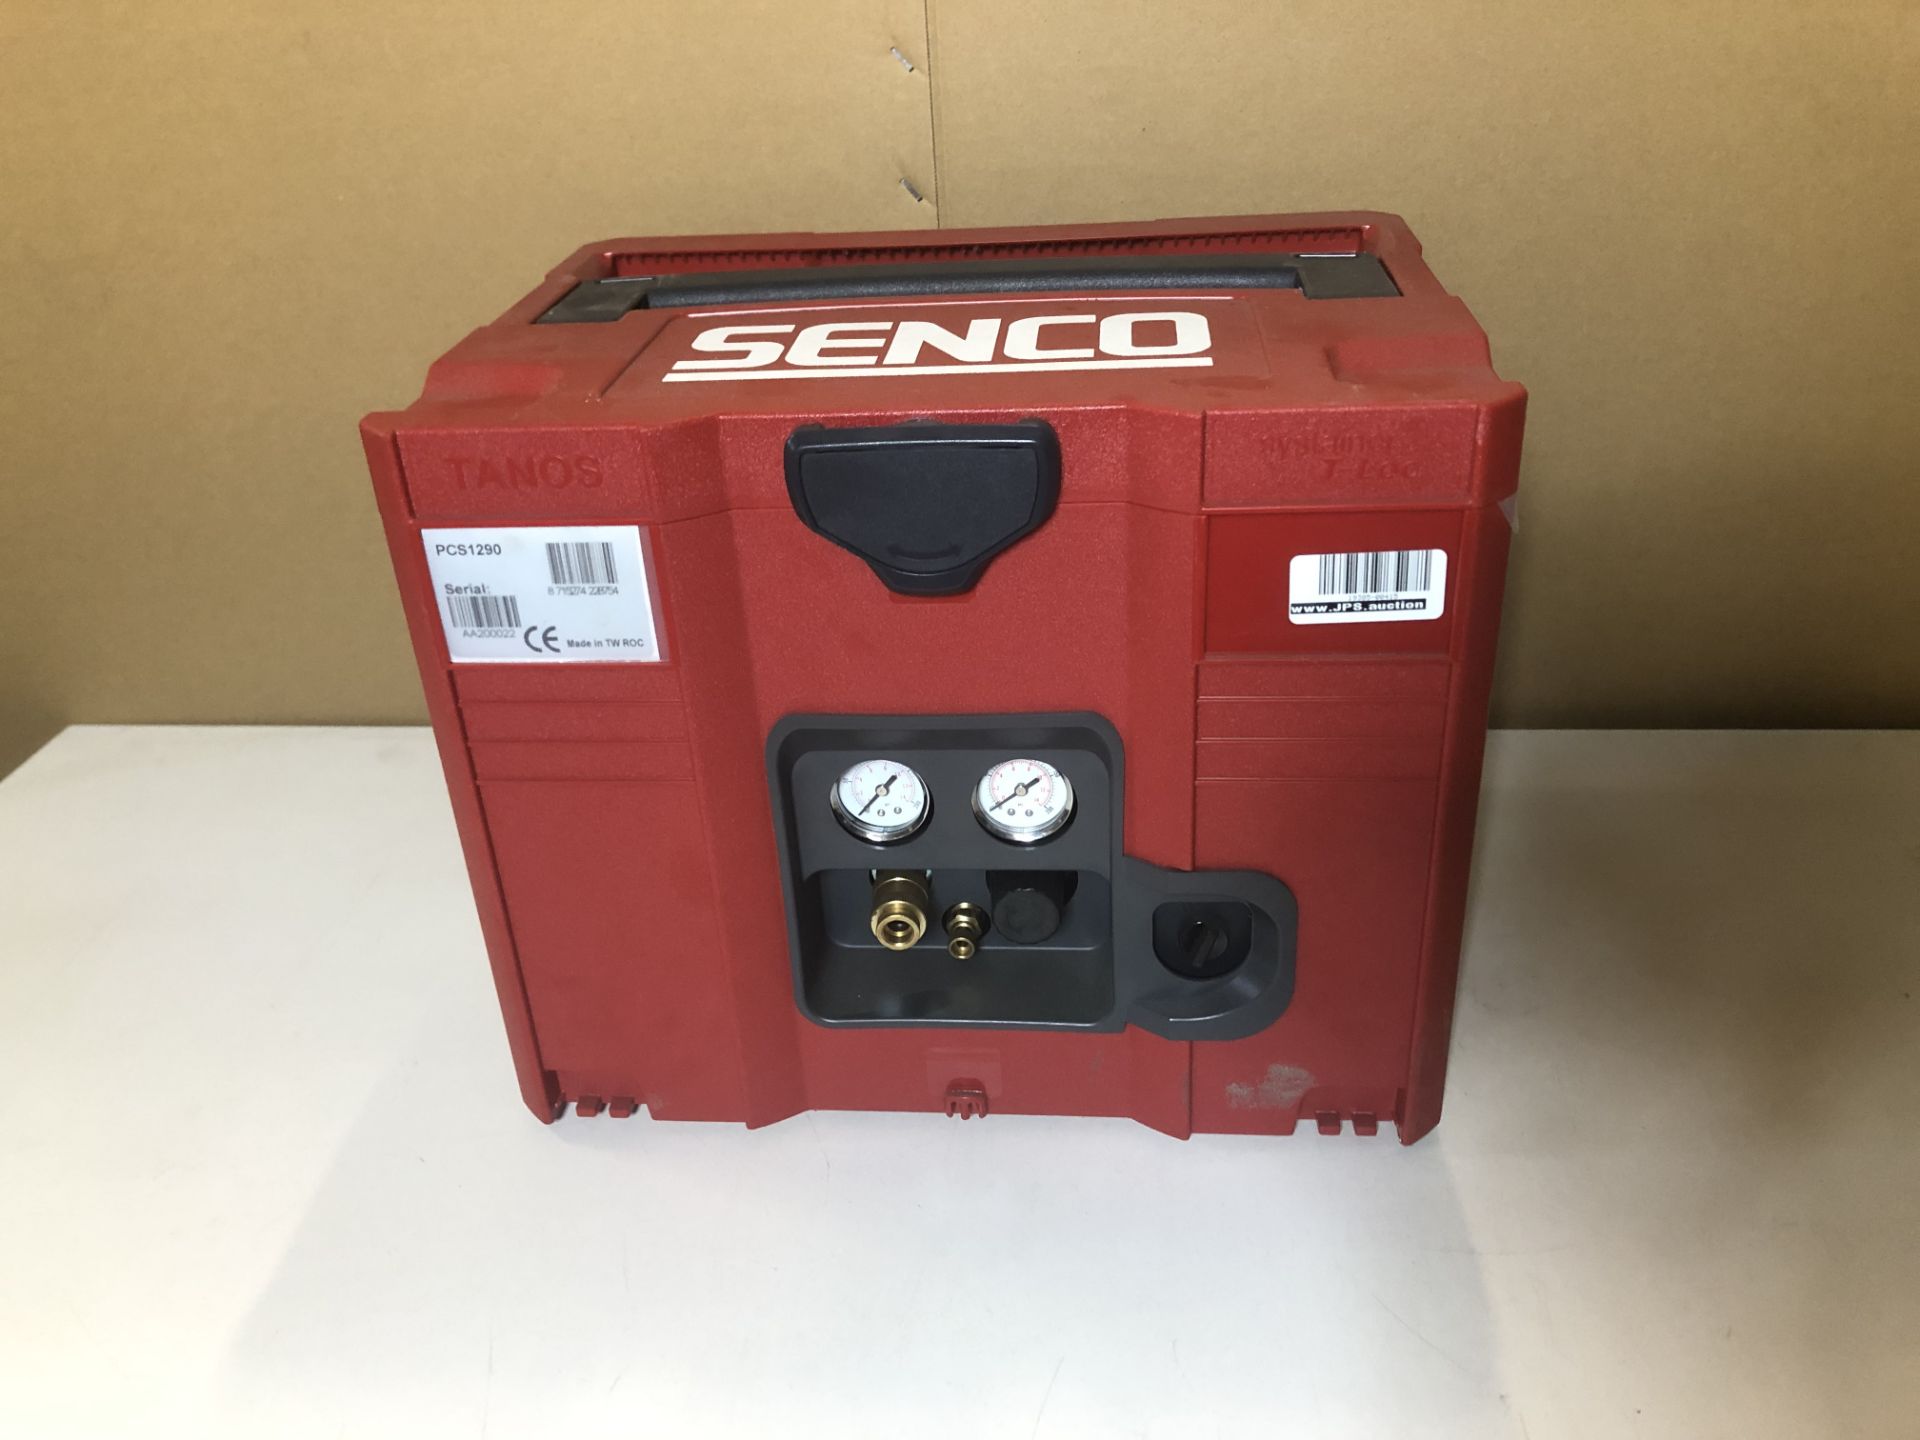 Senco Air Compressor in Systainer Form Fits Festool Systainer - 230V